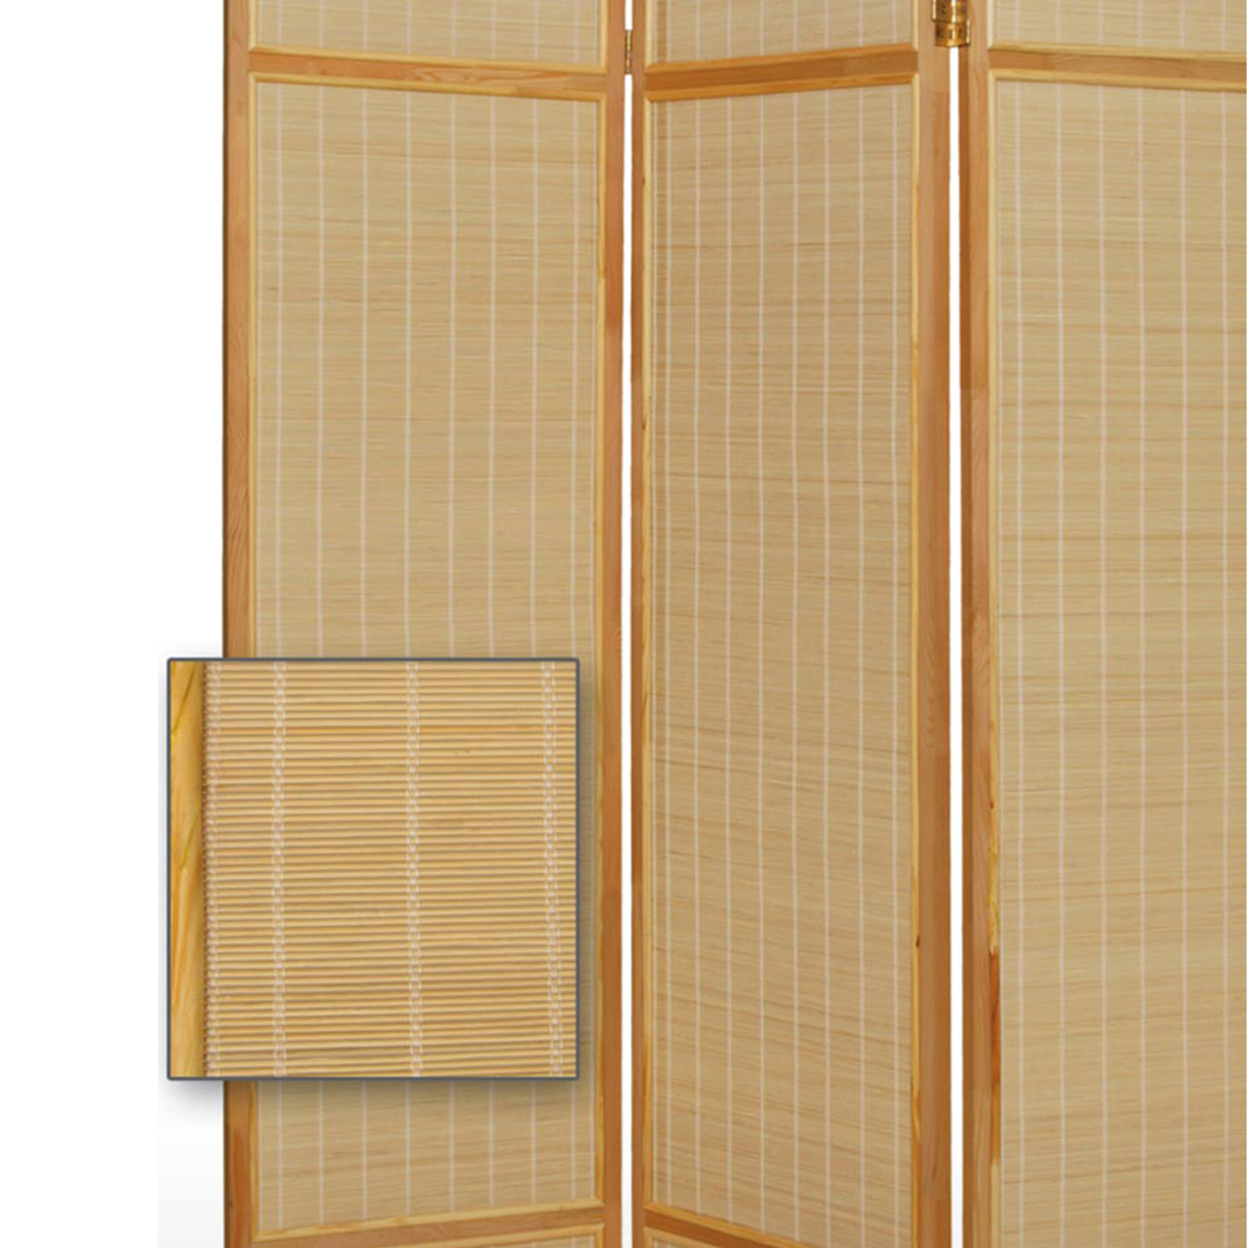 Wooden Frame 3 Panel Foldable Screen With Bamboo Straw Details, Brown- Saltoro Sherpi